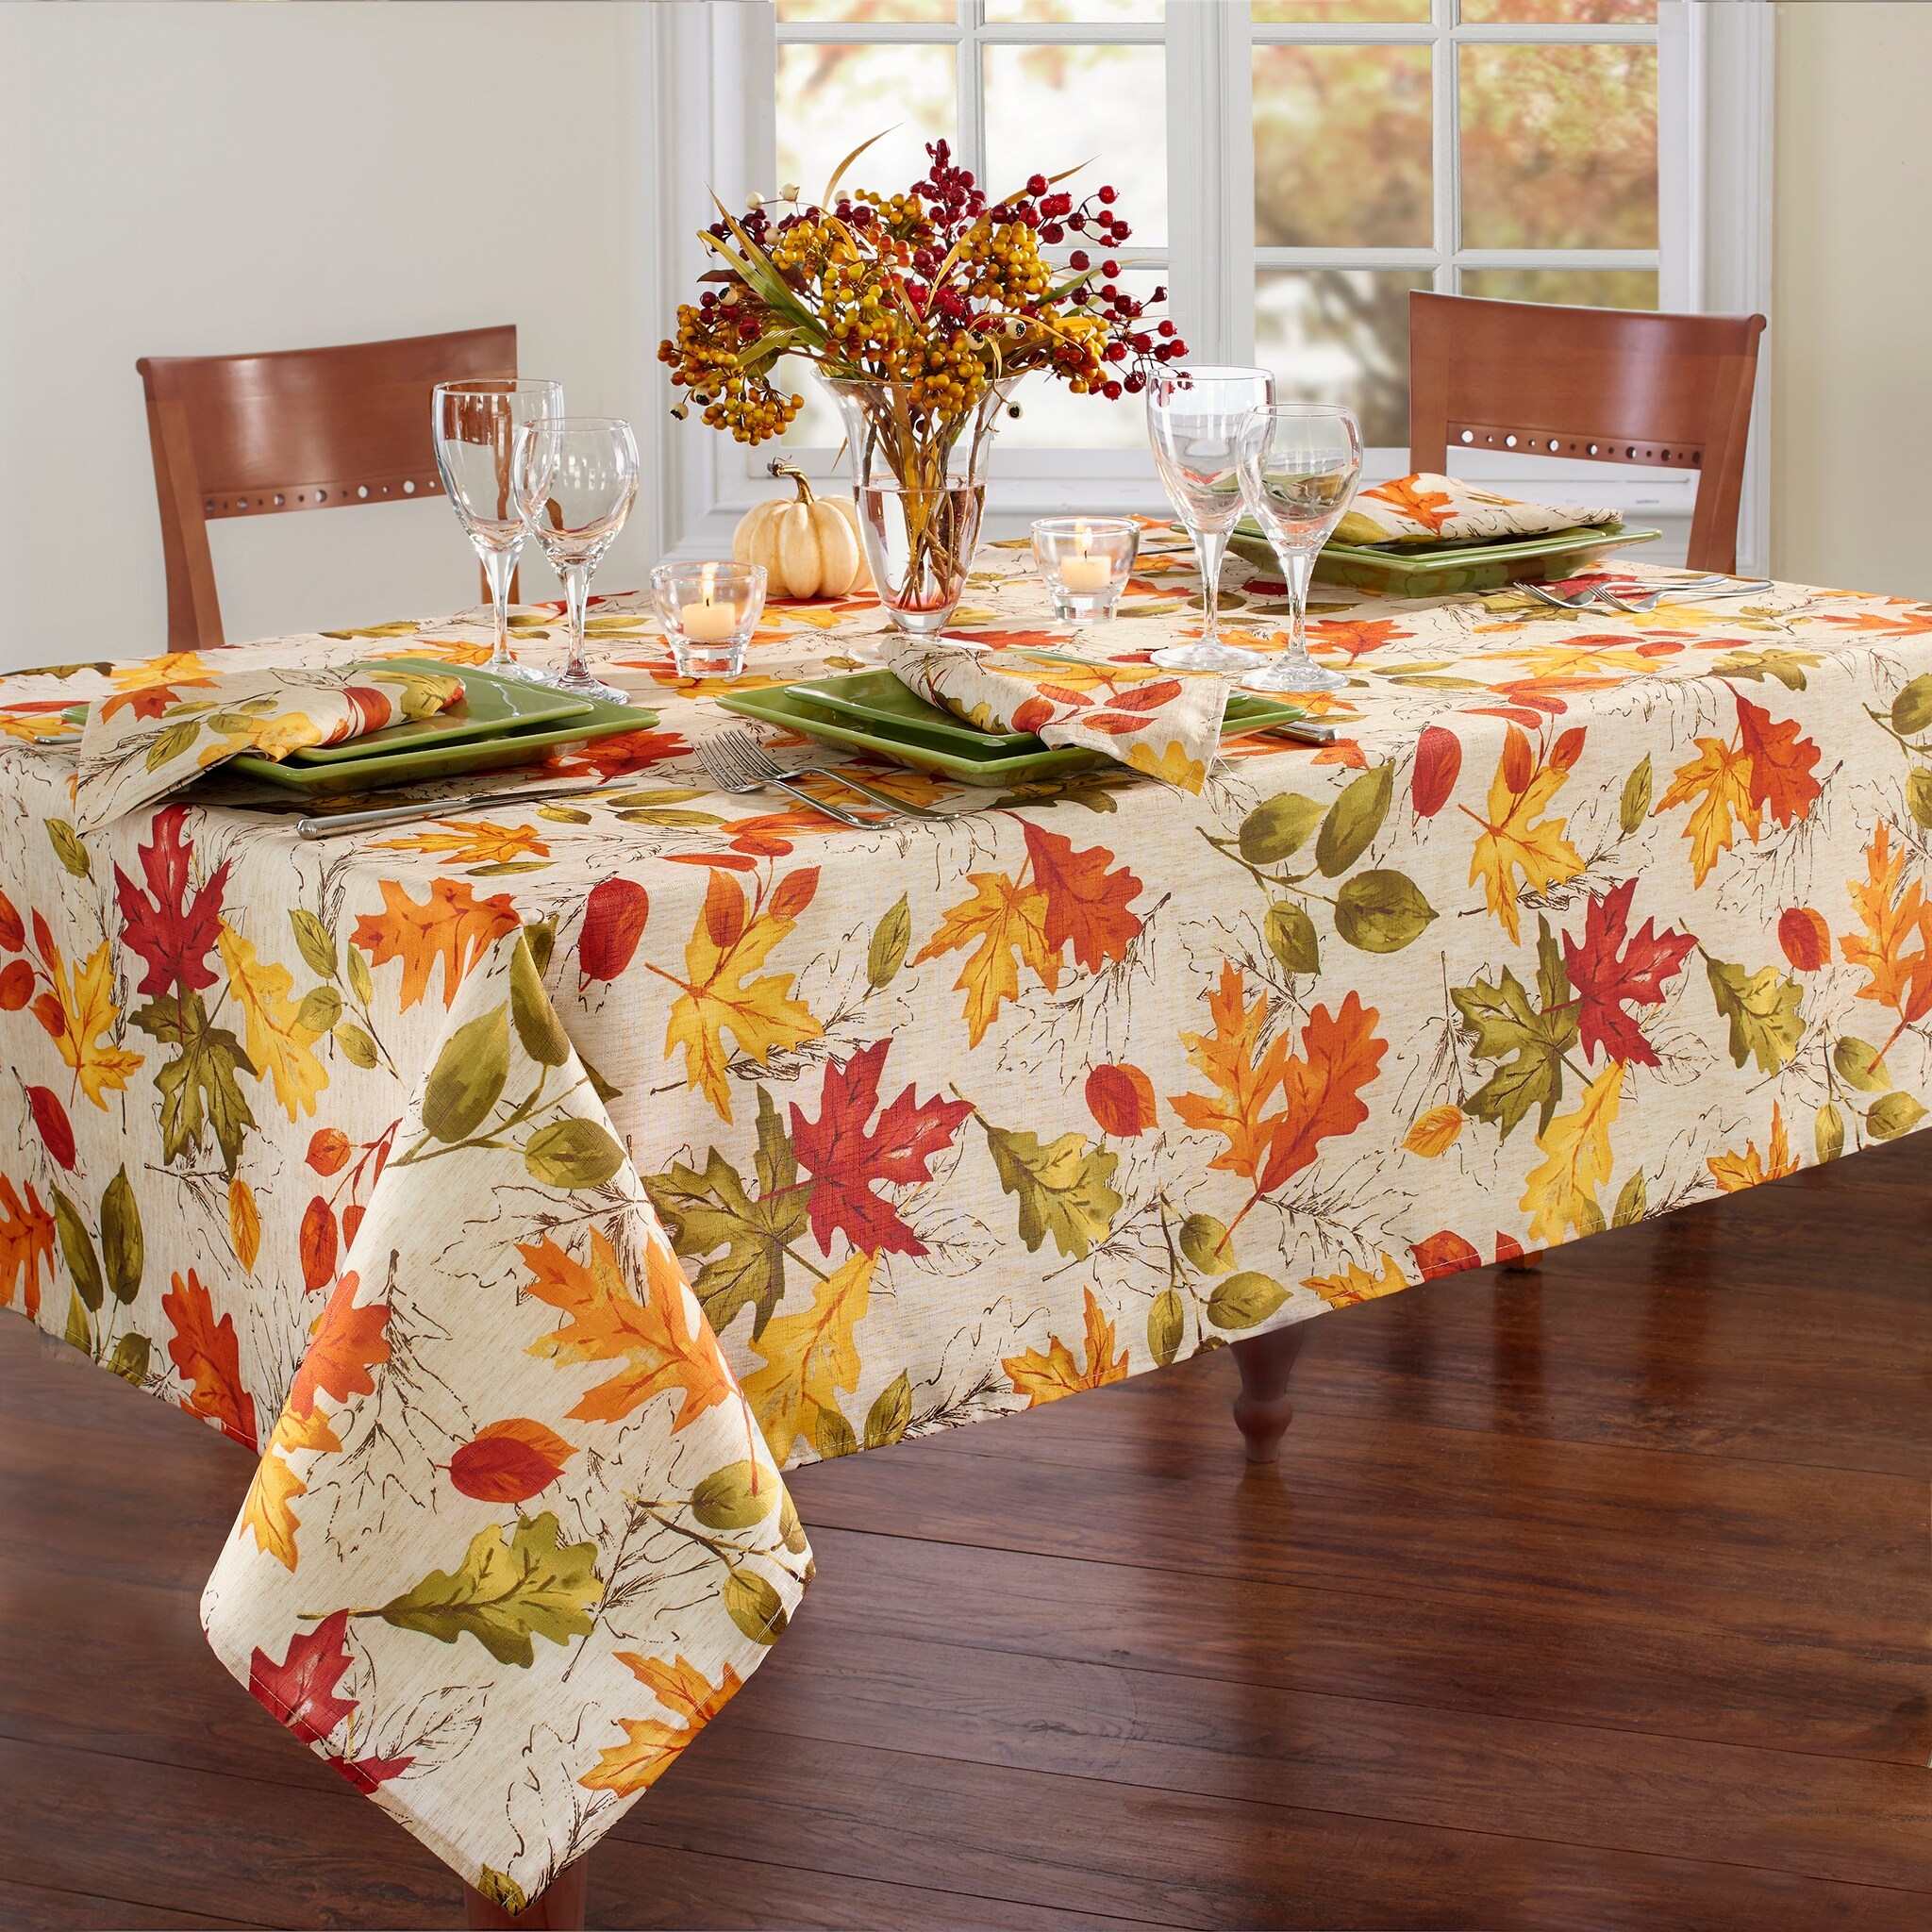 https://ak1.ostkcdn.com/images/products/is/images/direct/52c51b3f9f8c231b459c7618927d10c7502f0080/Autumn-Leaves-Fall-Printed-Tablecloth.jpg